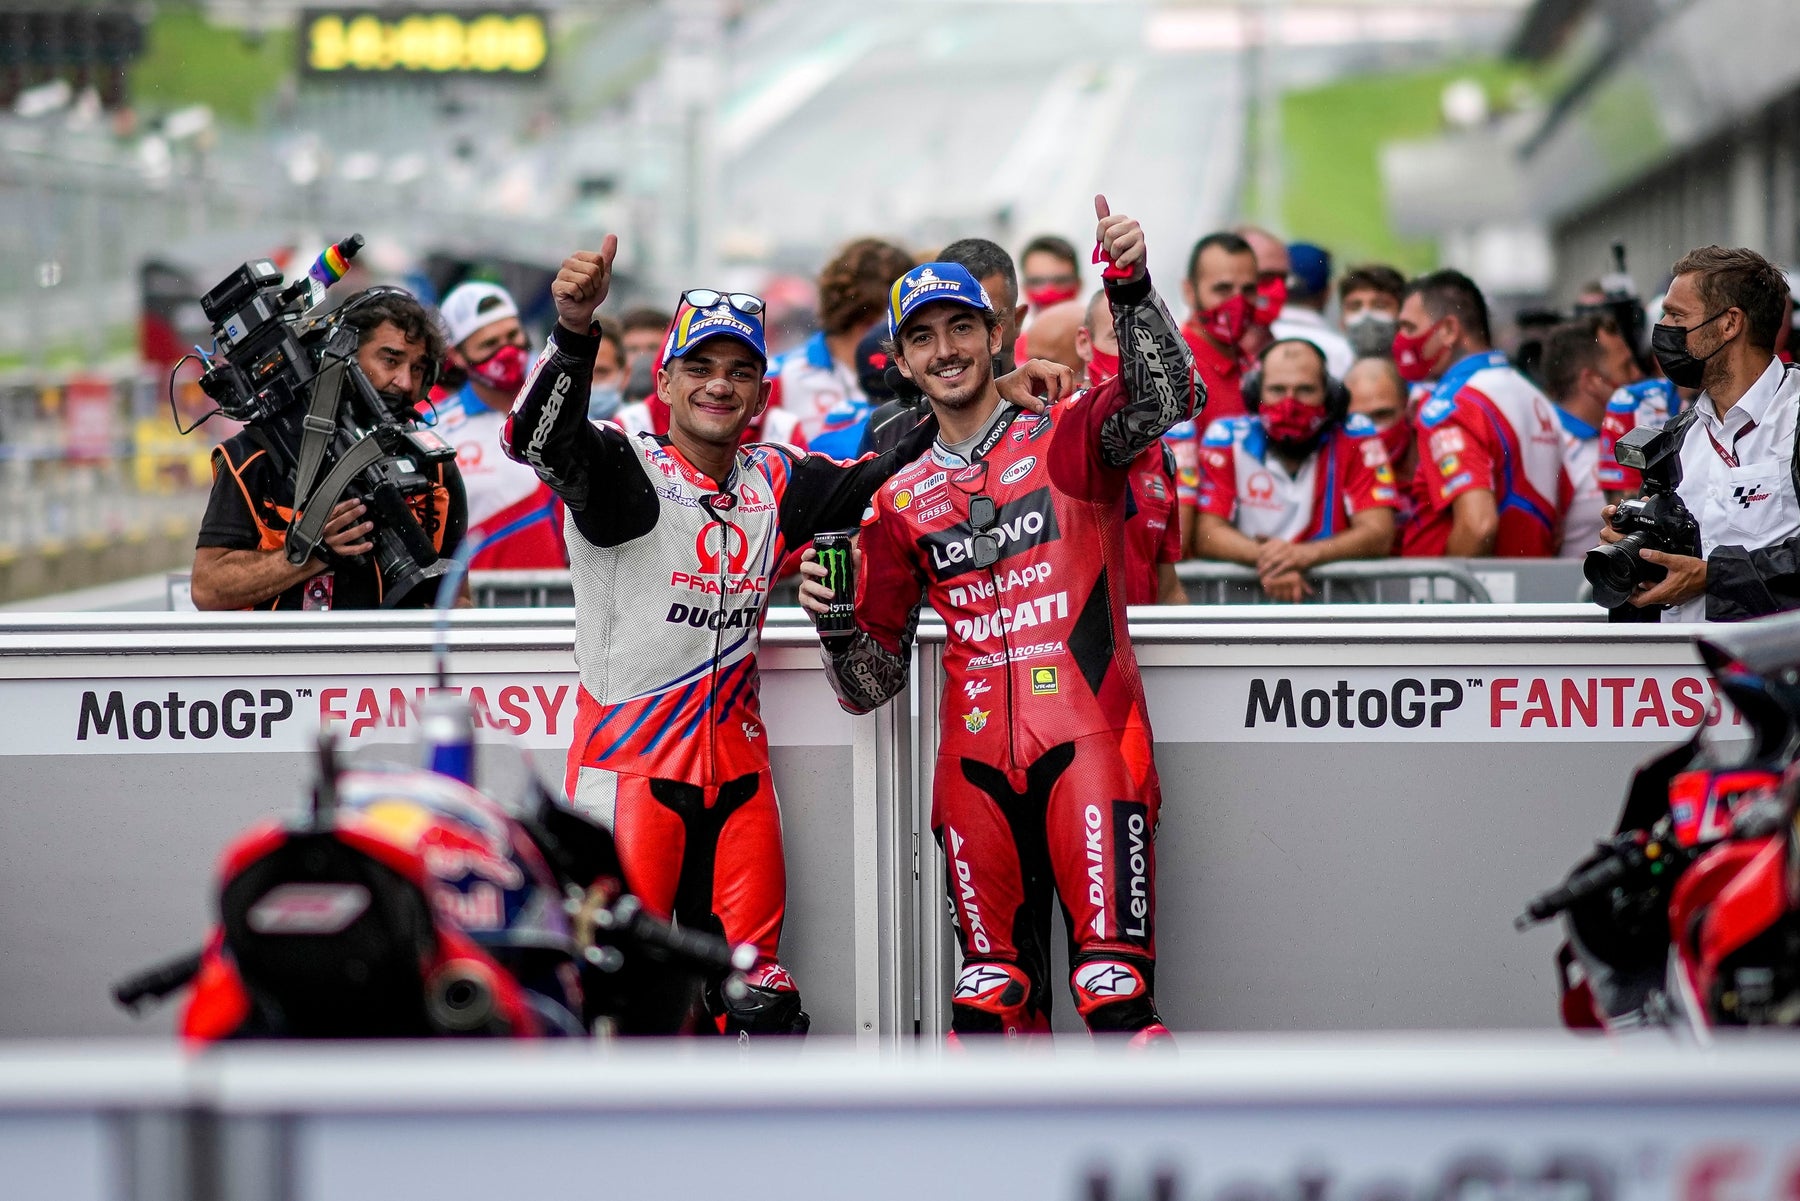 PECCO BAGNAIA AND JORGE MARTIN DELIVER MOTOGP WET WEATHER MASTERCLASS AT THE RED BULL RING, AUSTRIA